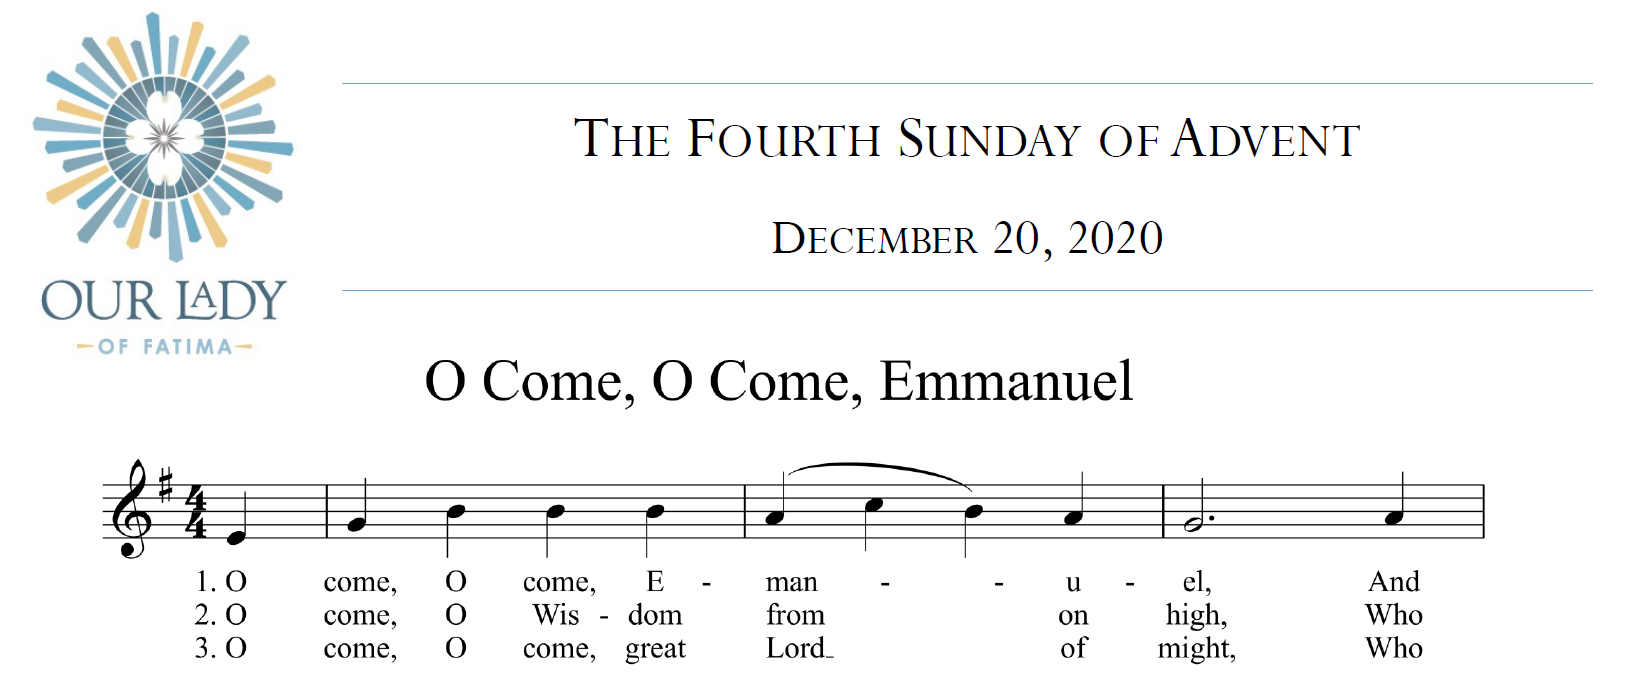 Worship Aid for The Fourth Sunday of Advent